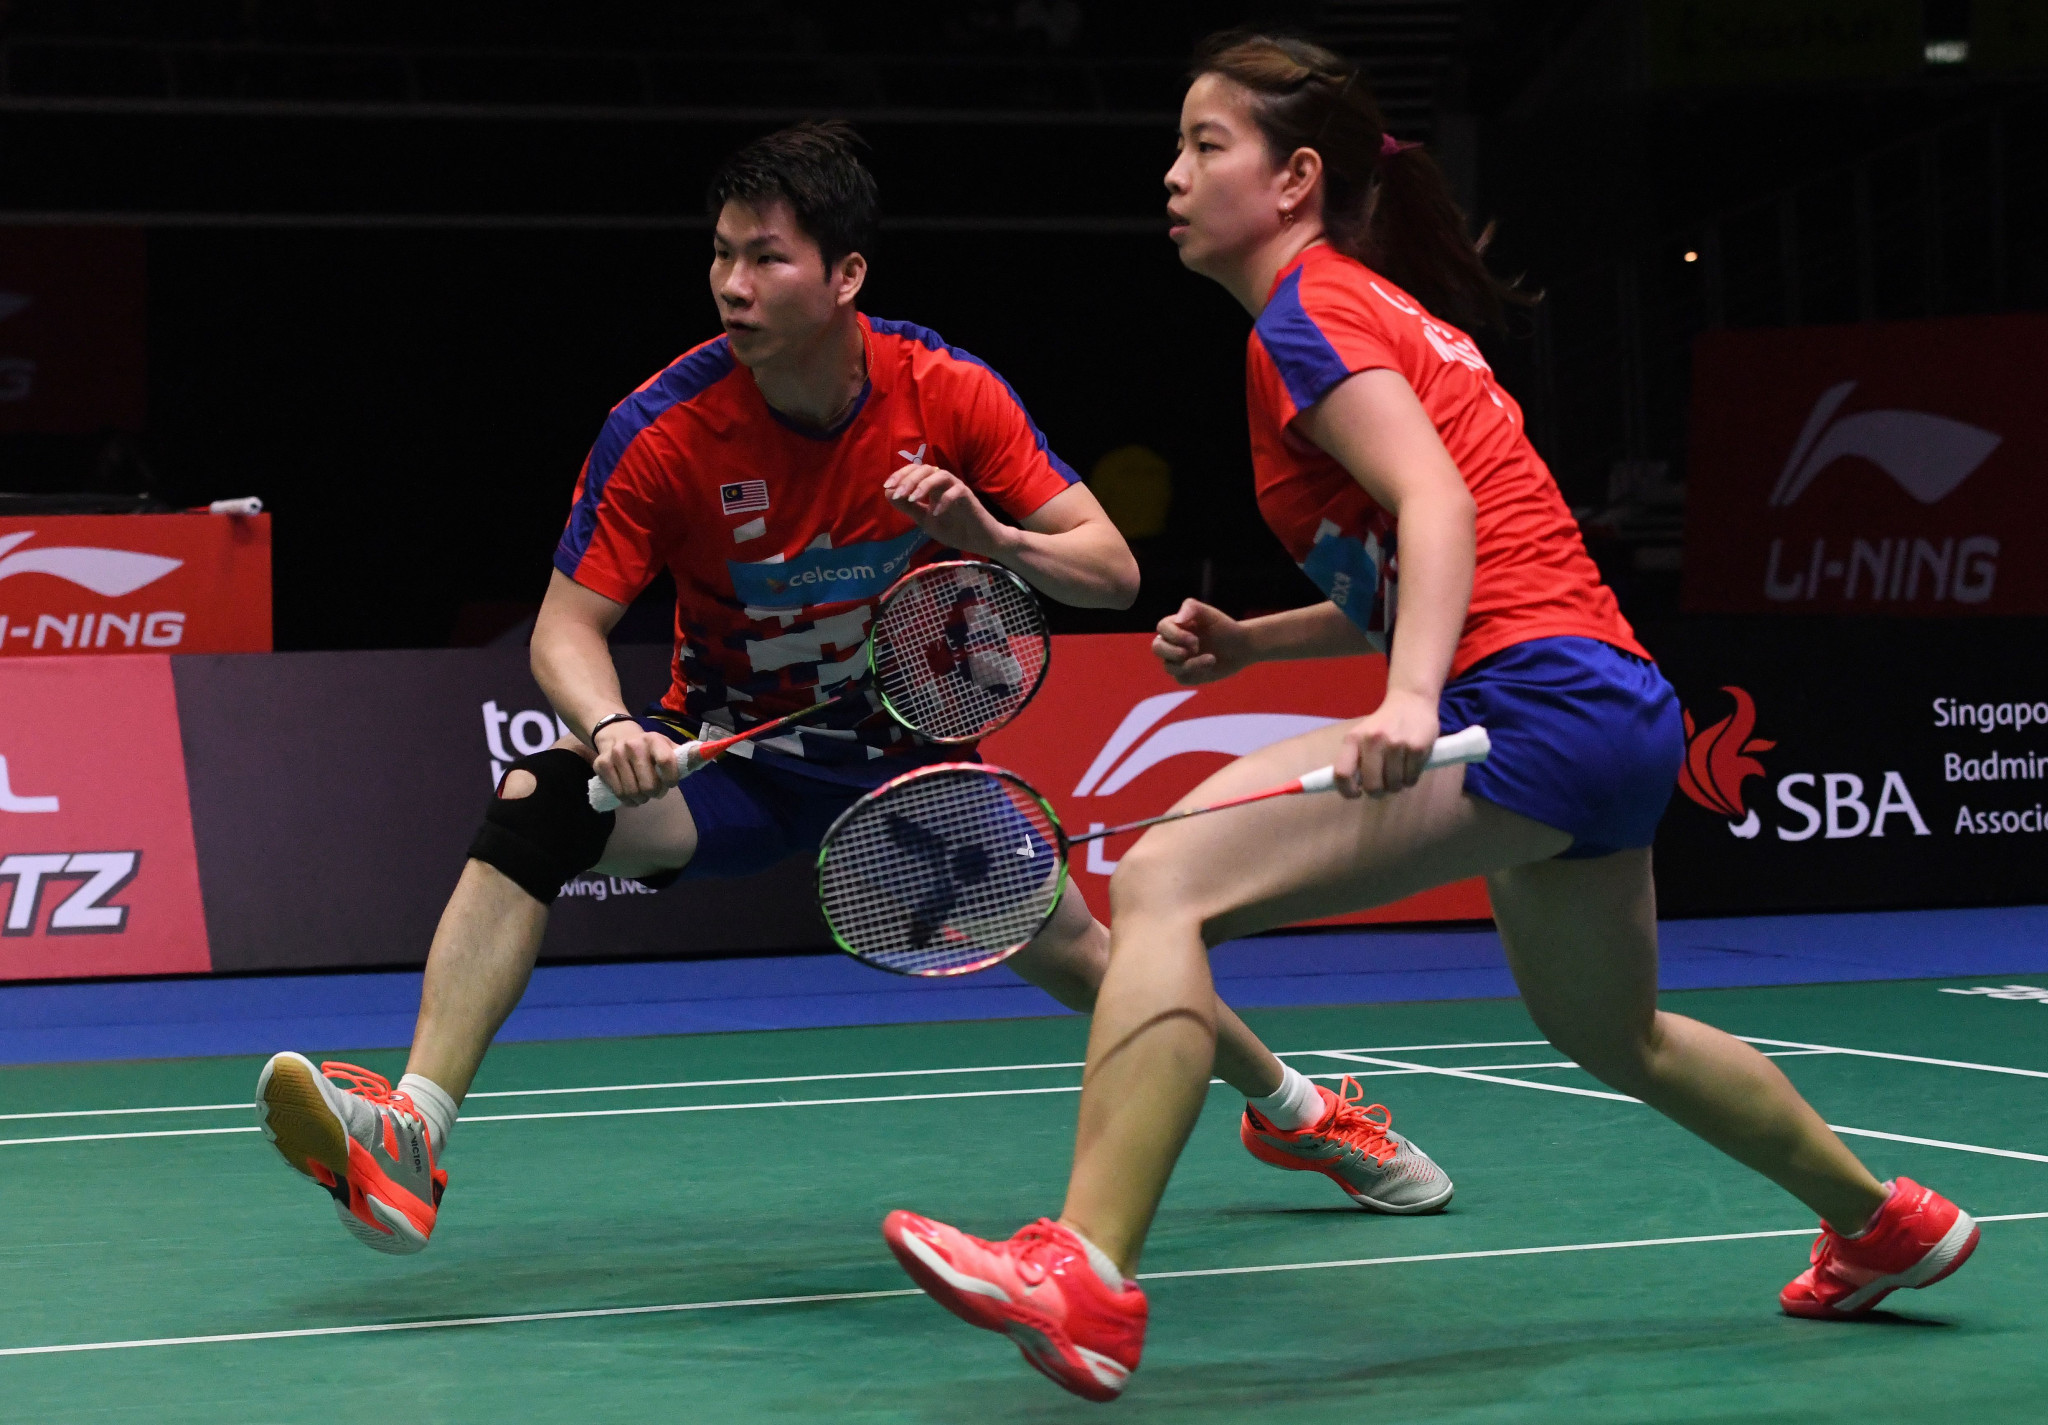 Malaysian badminton players Goh and Lai announce engagement